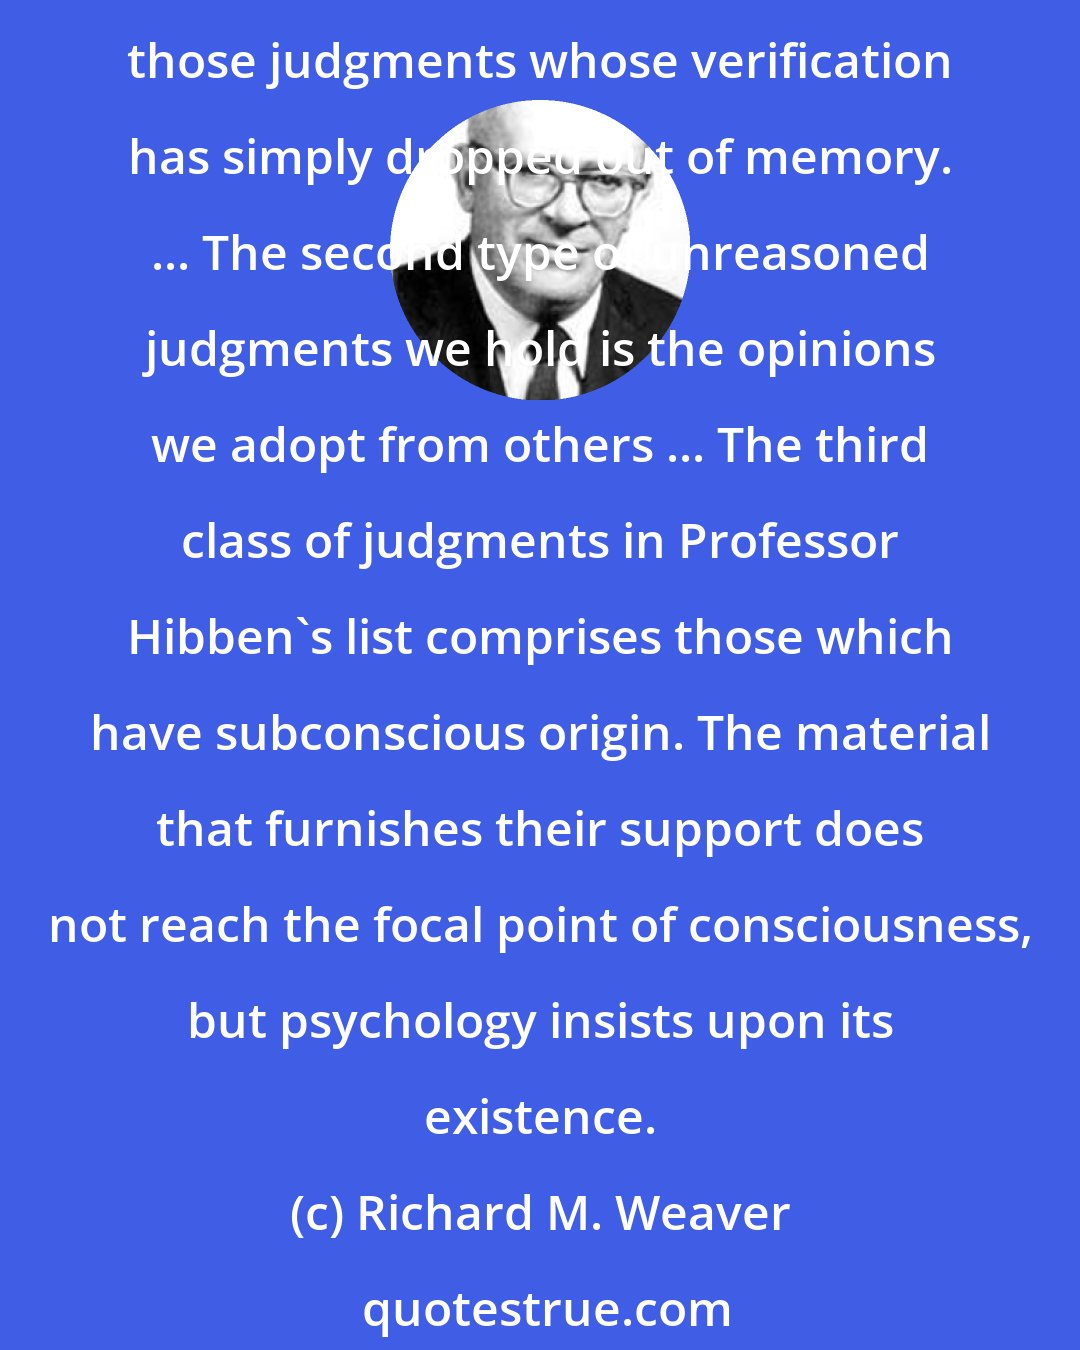 Richard M. Weaver: A prejudice may be an unreasoned judgment, he [Hibben] pointed out, but an unreasoned judgment is not necessarily an illogical judgment. ... First, there are those judgments whose verification has simply dropped out of memory. ... The second type of unreasoned judgments we hold is the opinions we adopt from others ... The third class of judgments in Professor Hibben's list comprises those which have subconscious origin. The material that furnishes their support does not reach the focal point of consciousness, but psychology insists upon its existence.